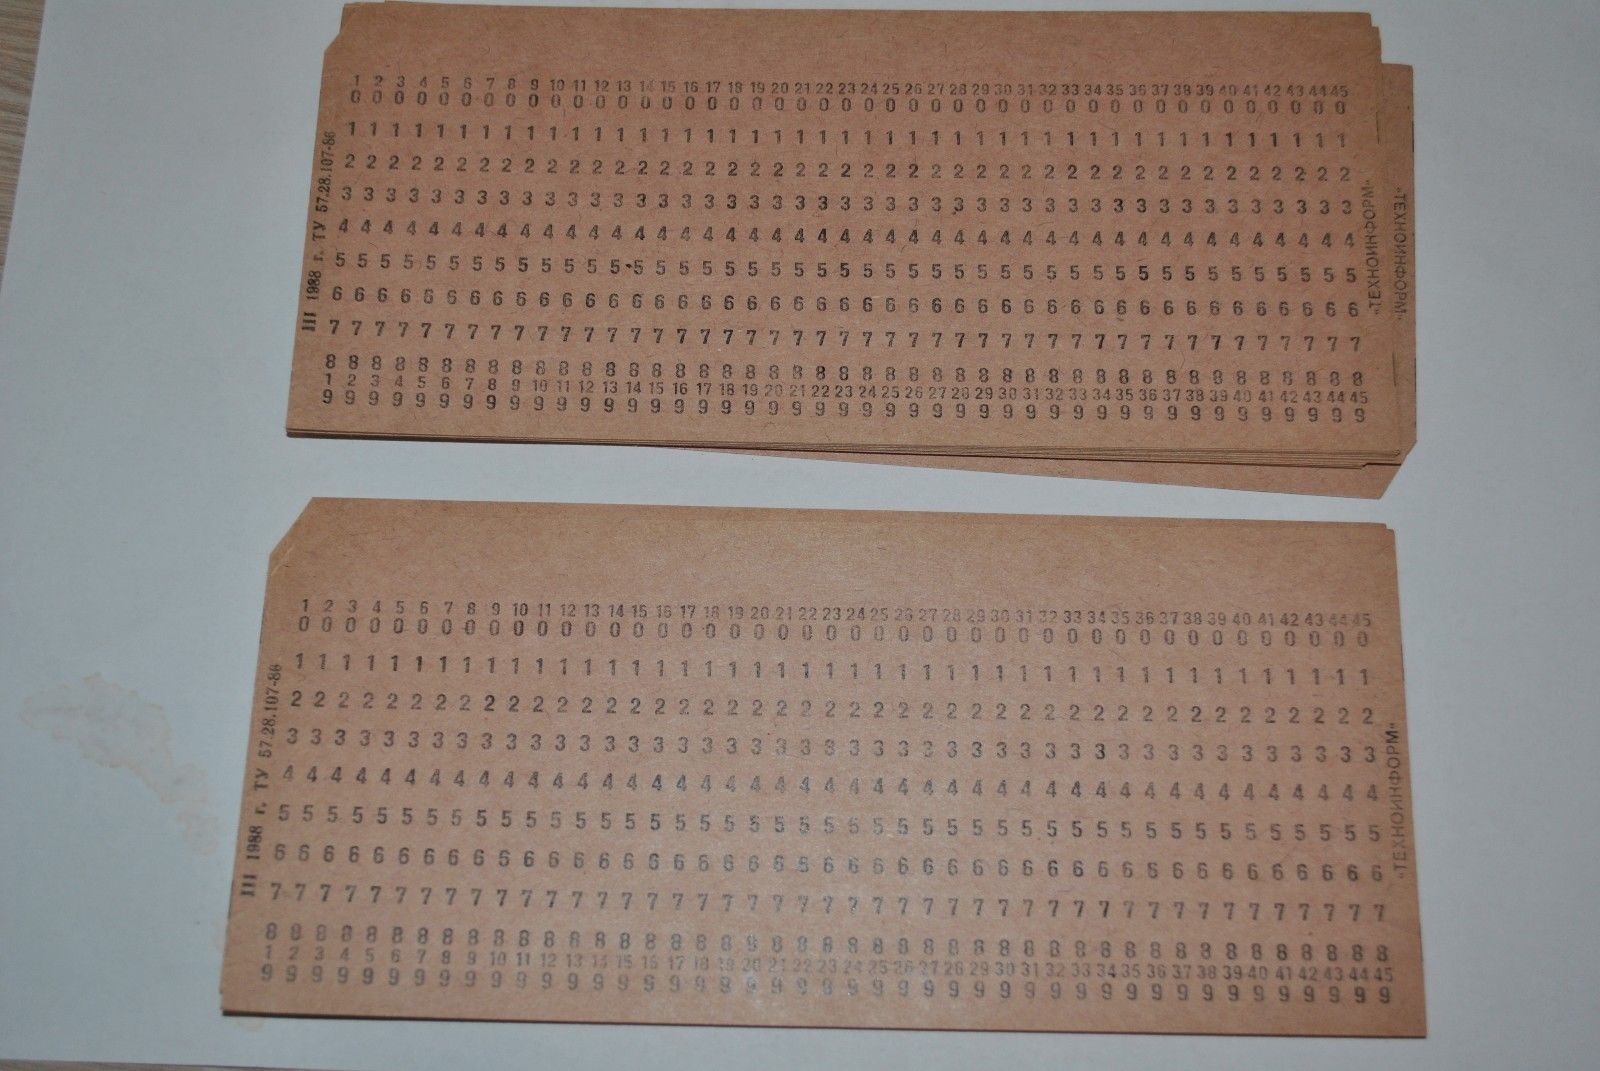 20 pcs USSR Computer Mainframe Punch Card Perforated 1980s